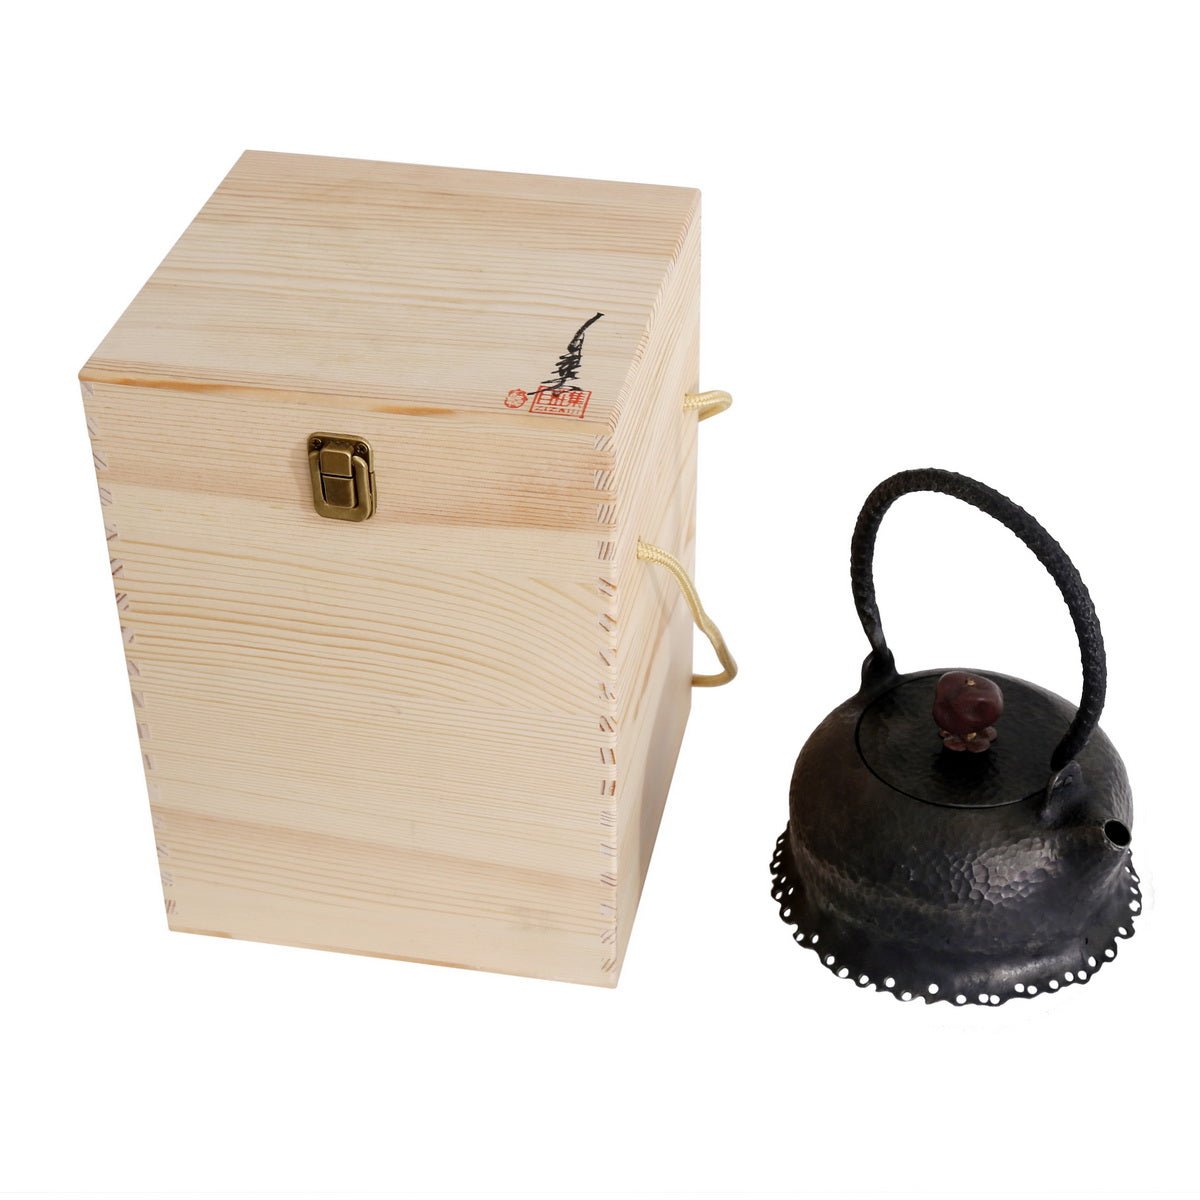 TS Iron Handcraft Iron Kettle (wrought iron) - Large, with skirt, Amber button - Taishan Tea Club